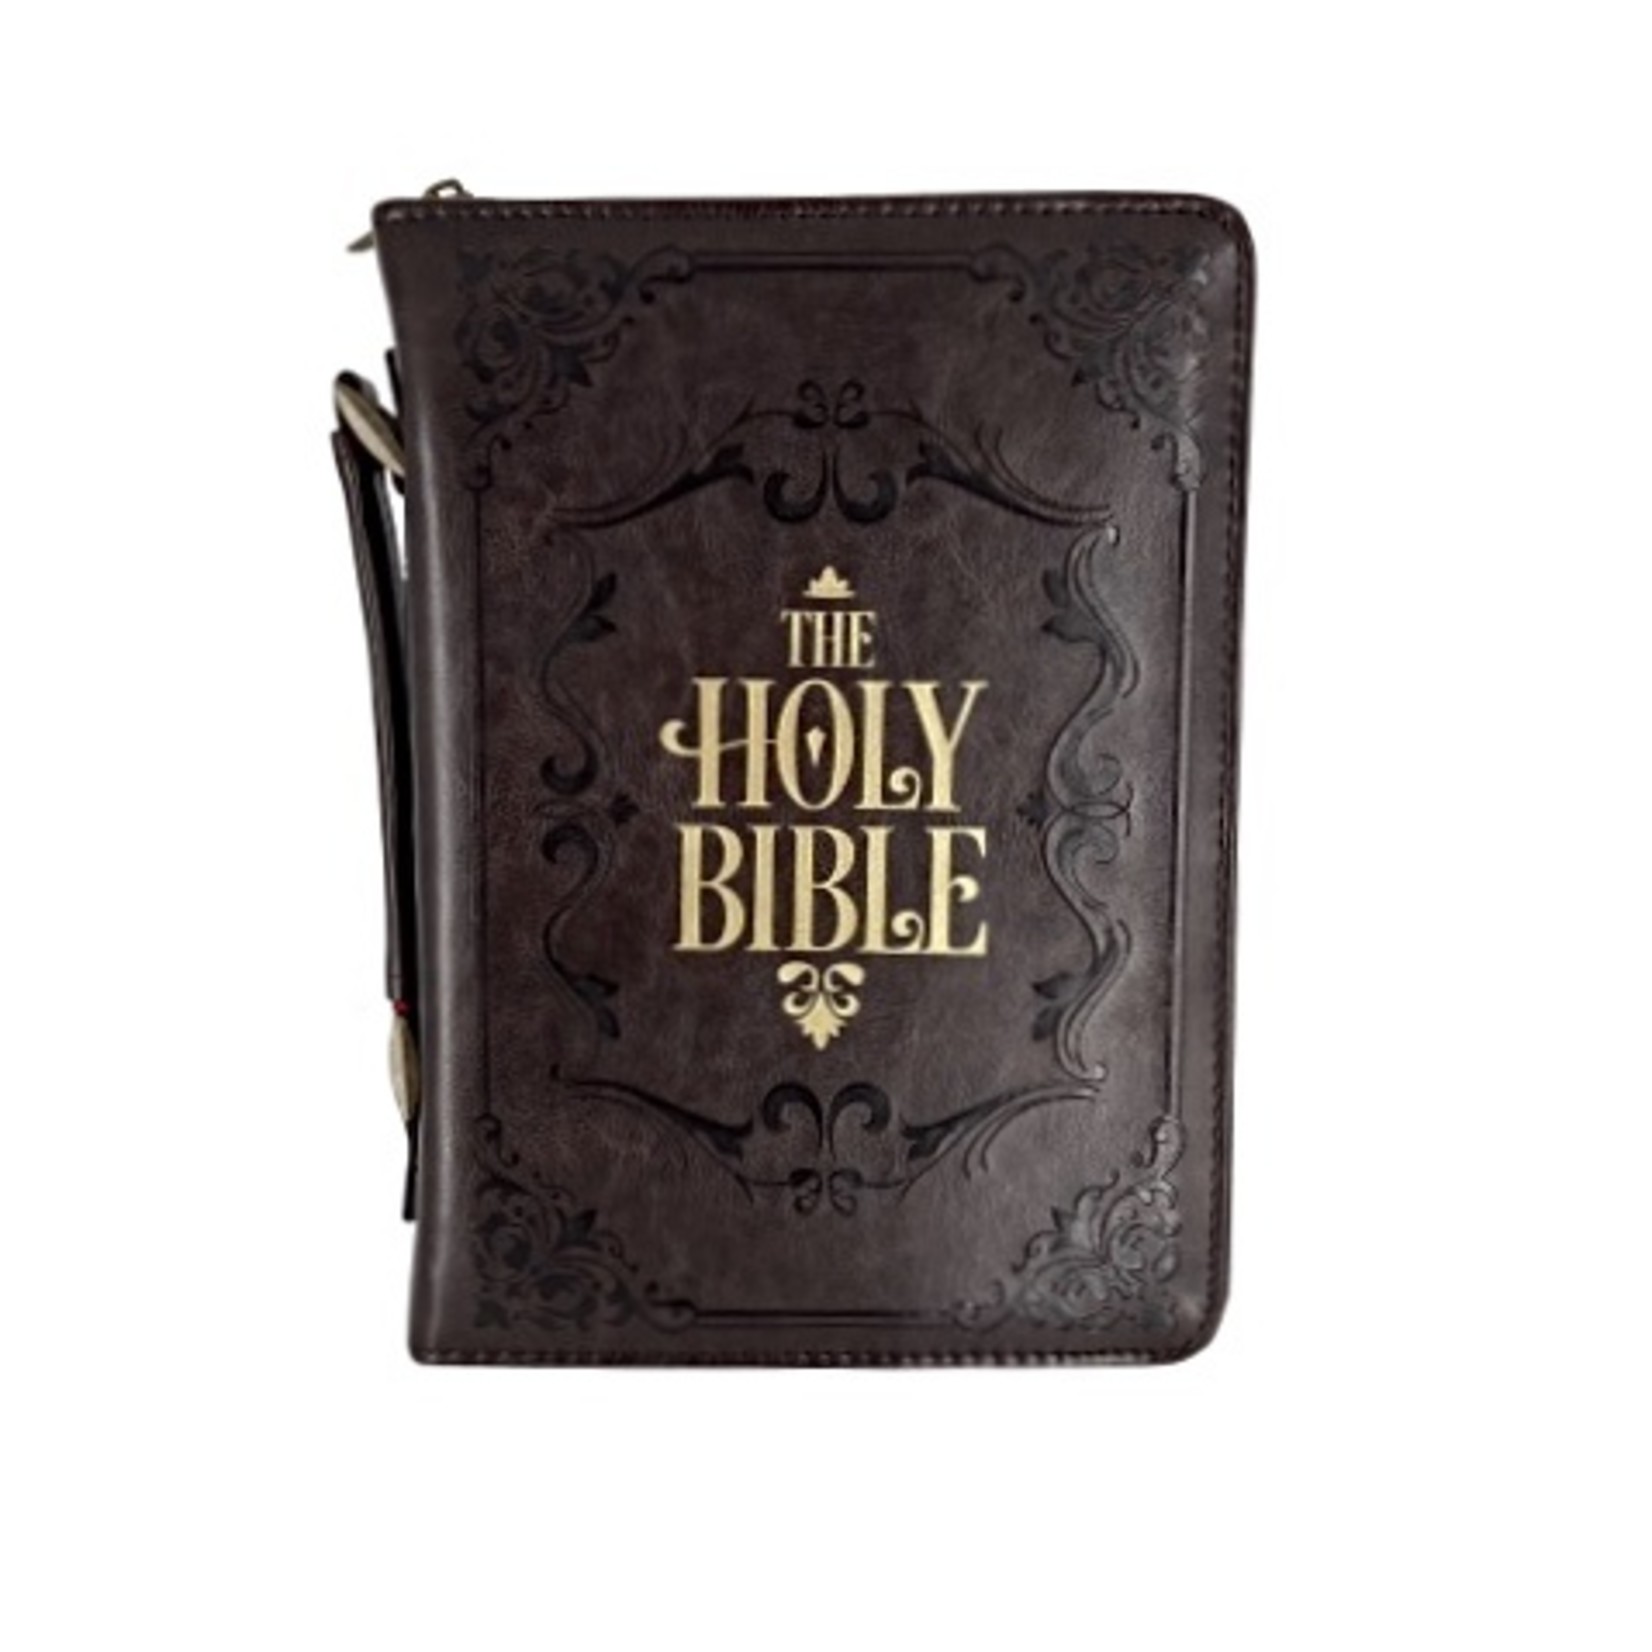 THE HOLY BIBLE - BIBLE COVER BROWN